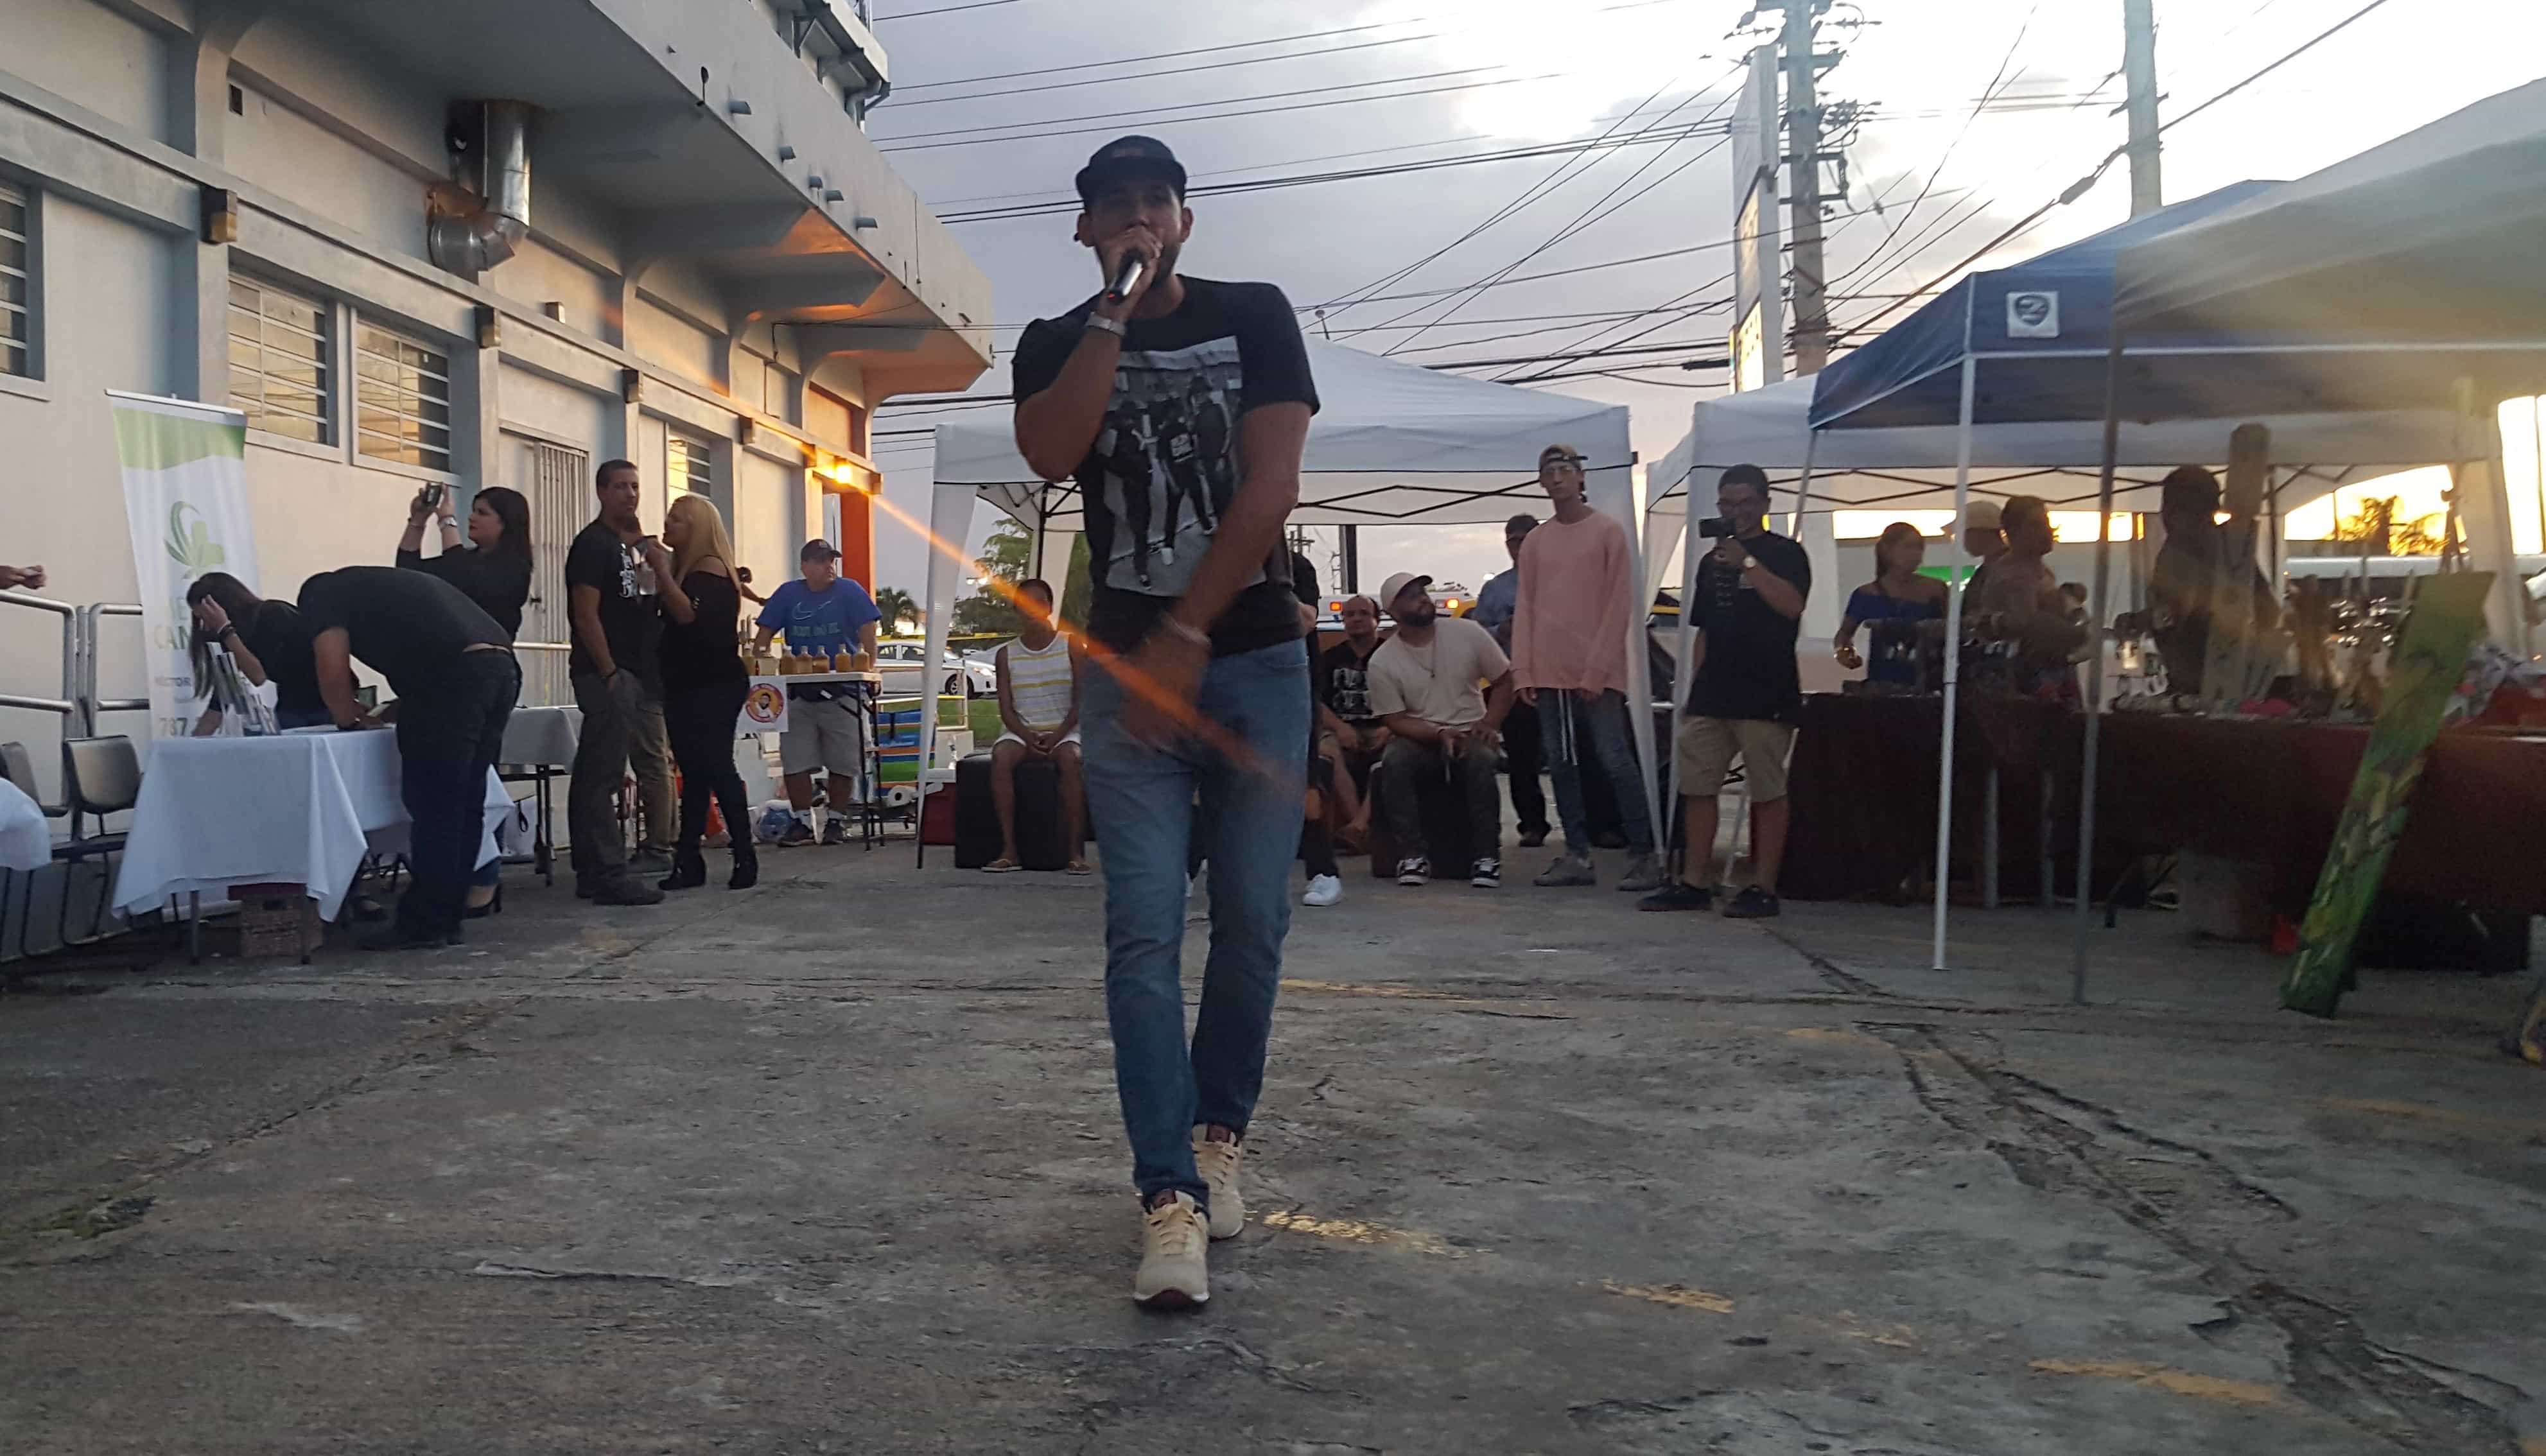 Musician performing during sunset in Mayagüez, at the cannabis education event. (Photo courtesy of Vive Boriken and D’Lab)